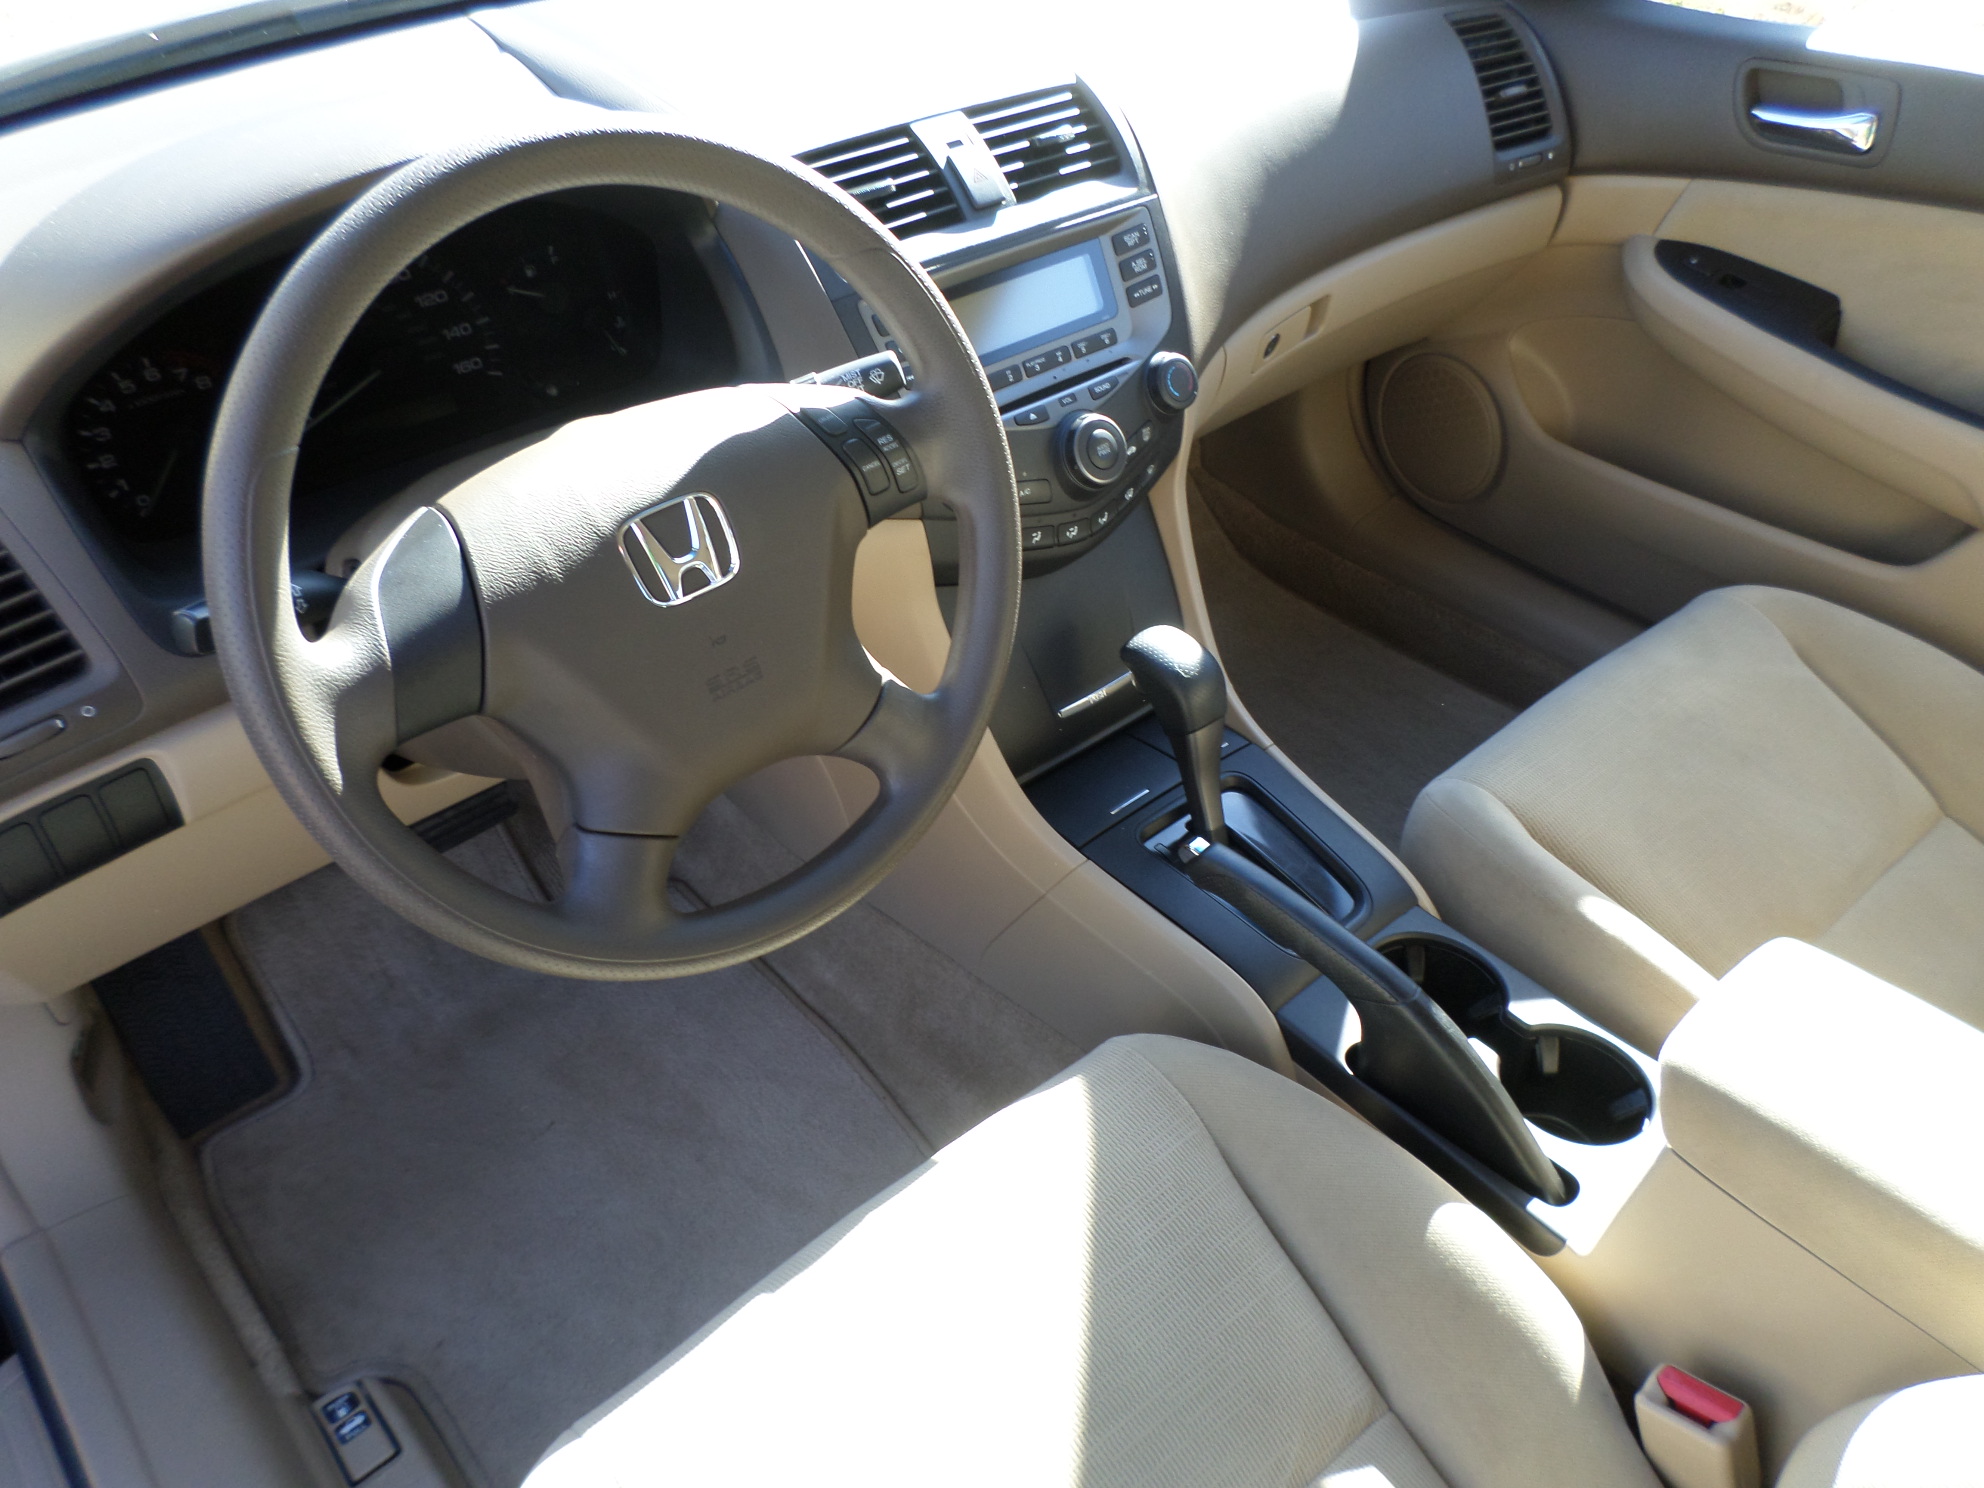 Copy of Copy of Interior Car Detailing in Central Minnesota